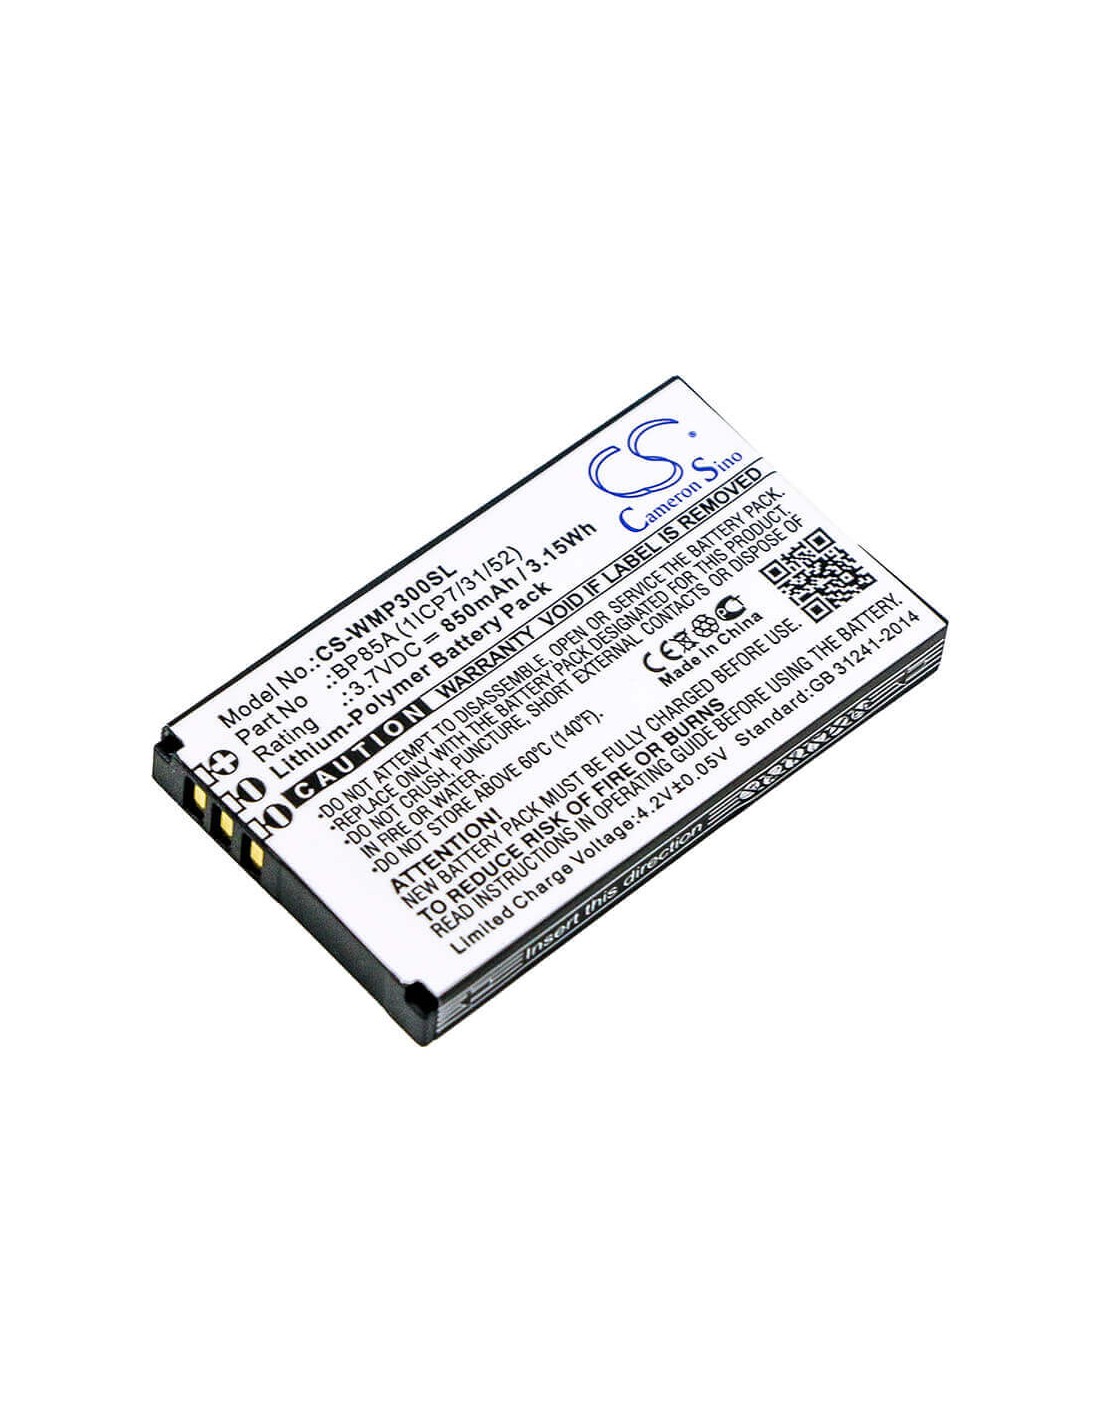 Battery for Wm Systems, Wmp 300, Wmp-300, 3.7V, 850mAh - 3.15Wh